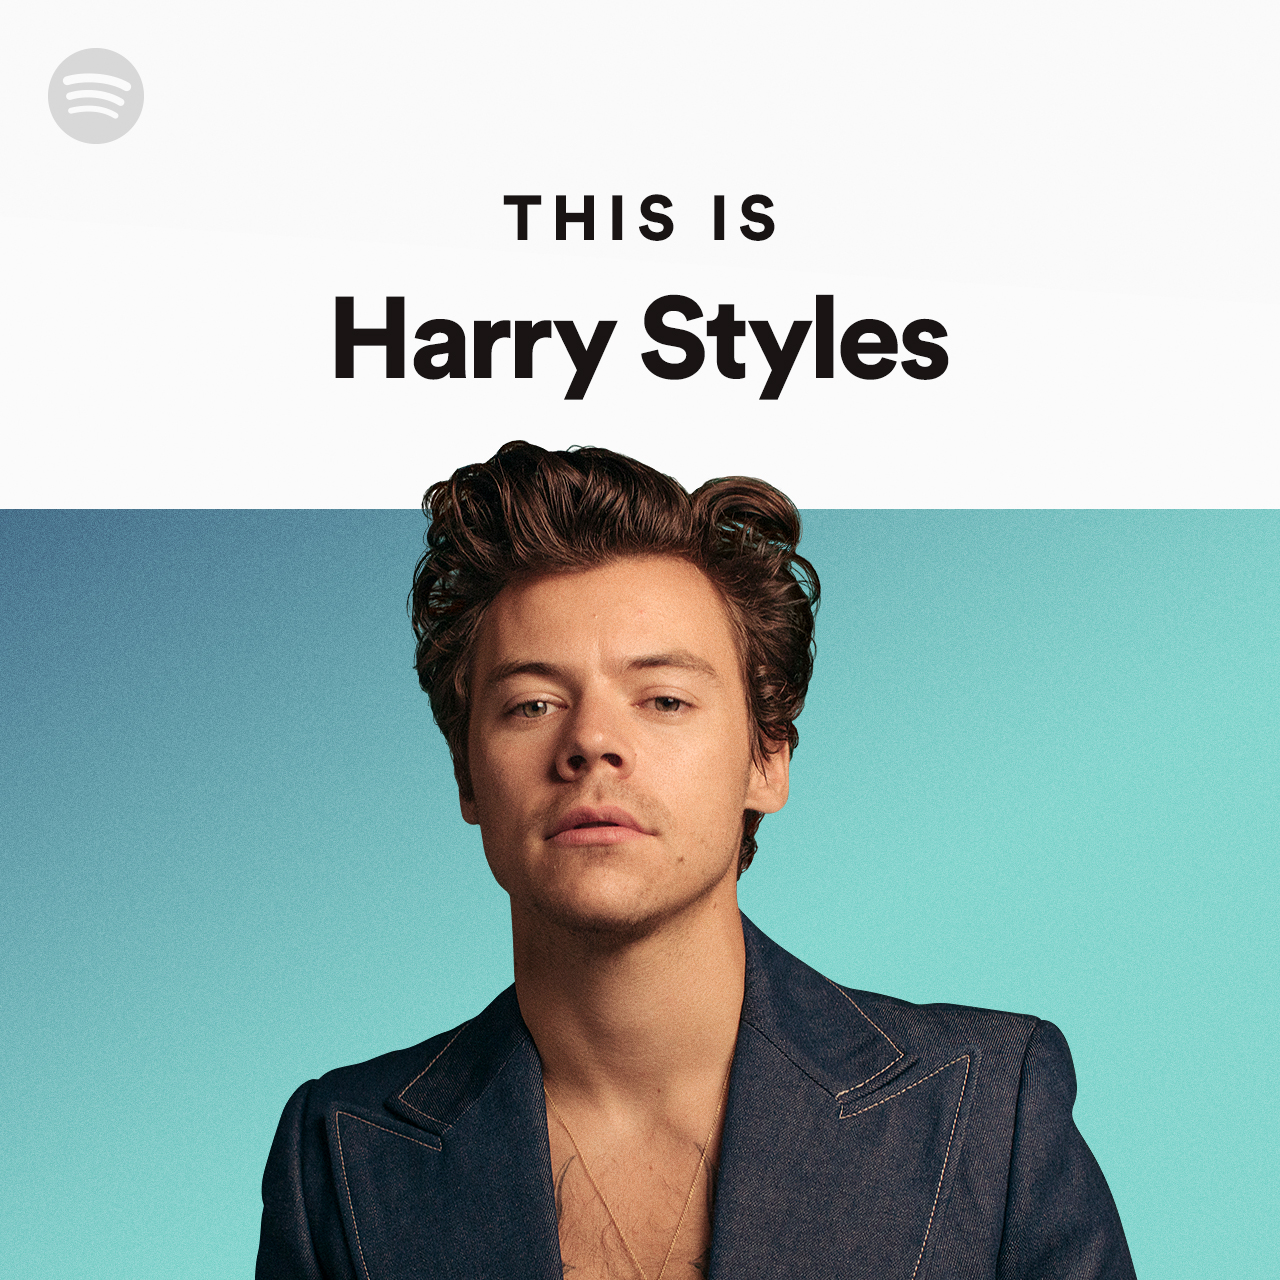 Harry styles girl crush spotify download apk